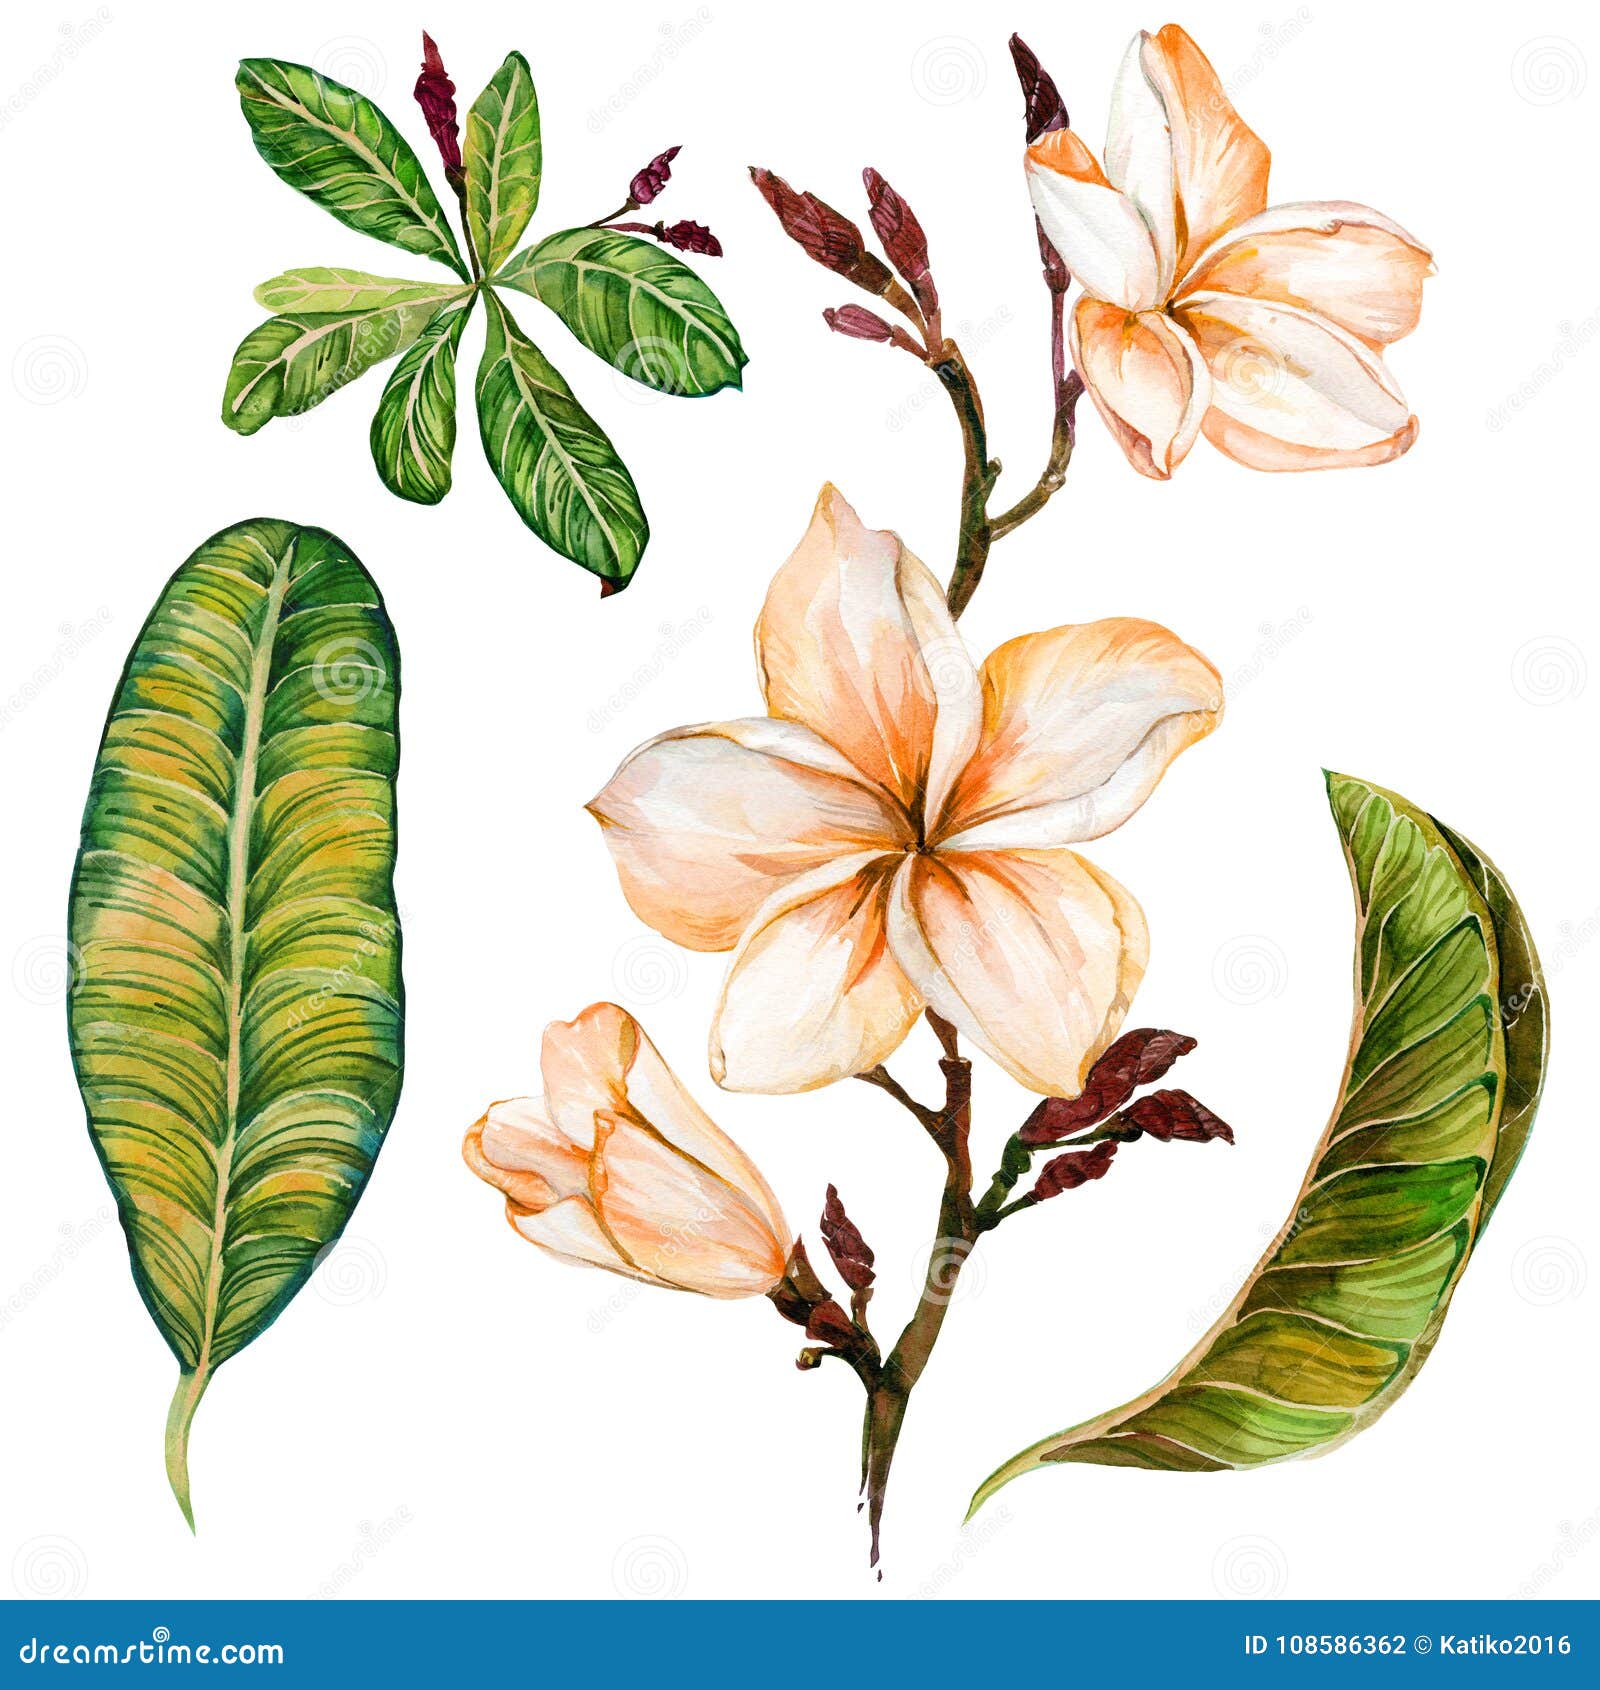 plumeria flower on a twig. tropical floral set flowers and leaves.  on white background. watercolor painting.